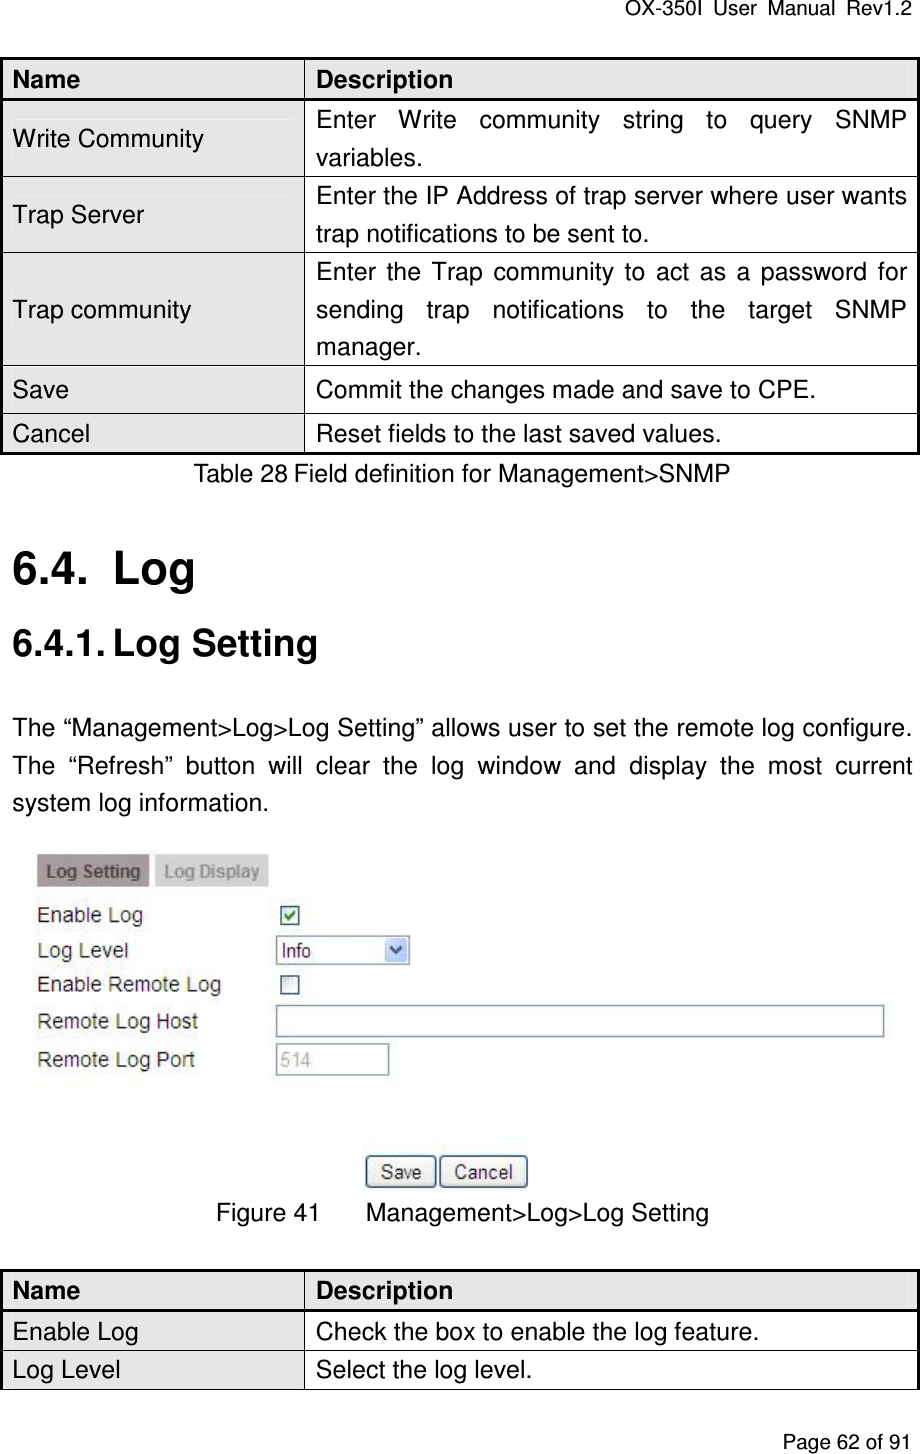 OX-350I  User  Manual  Rev1.2 Page 62 of 91 Name  Description Write Community  Enter  Write  community  string  to  query  SNMP variables. Trap Server  Enter the IP Address of trap server where user wants trap notifications to be sent to. Trap community Enter  the  Trap  community  to  act  as  a  password  for sending  trap  notifications  to  the  target  SNMP manager. Save  Commit the changes made and save to CPE. Cancel  Reset fields to the last saved values. Table 28 Field definition for Management&gt;SNMP 6.4.  Log 6.4.1. Log Setting The “Management&gt;Log&gt;Log Setting” allows user to set the remote log configure. The  “Refresh”  button  will  clear  the  log  window  and  display  the  most  current system log information.  Figure 41  Management&gt;Log&gt;Log Setting Name  Description Enable Log  Check the box to enable the log feature. Log Level  Select the log level. 